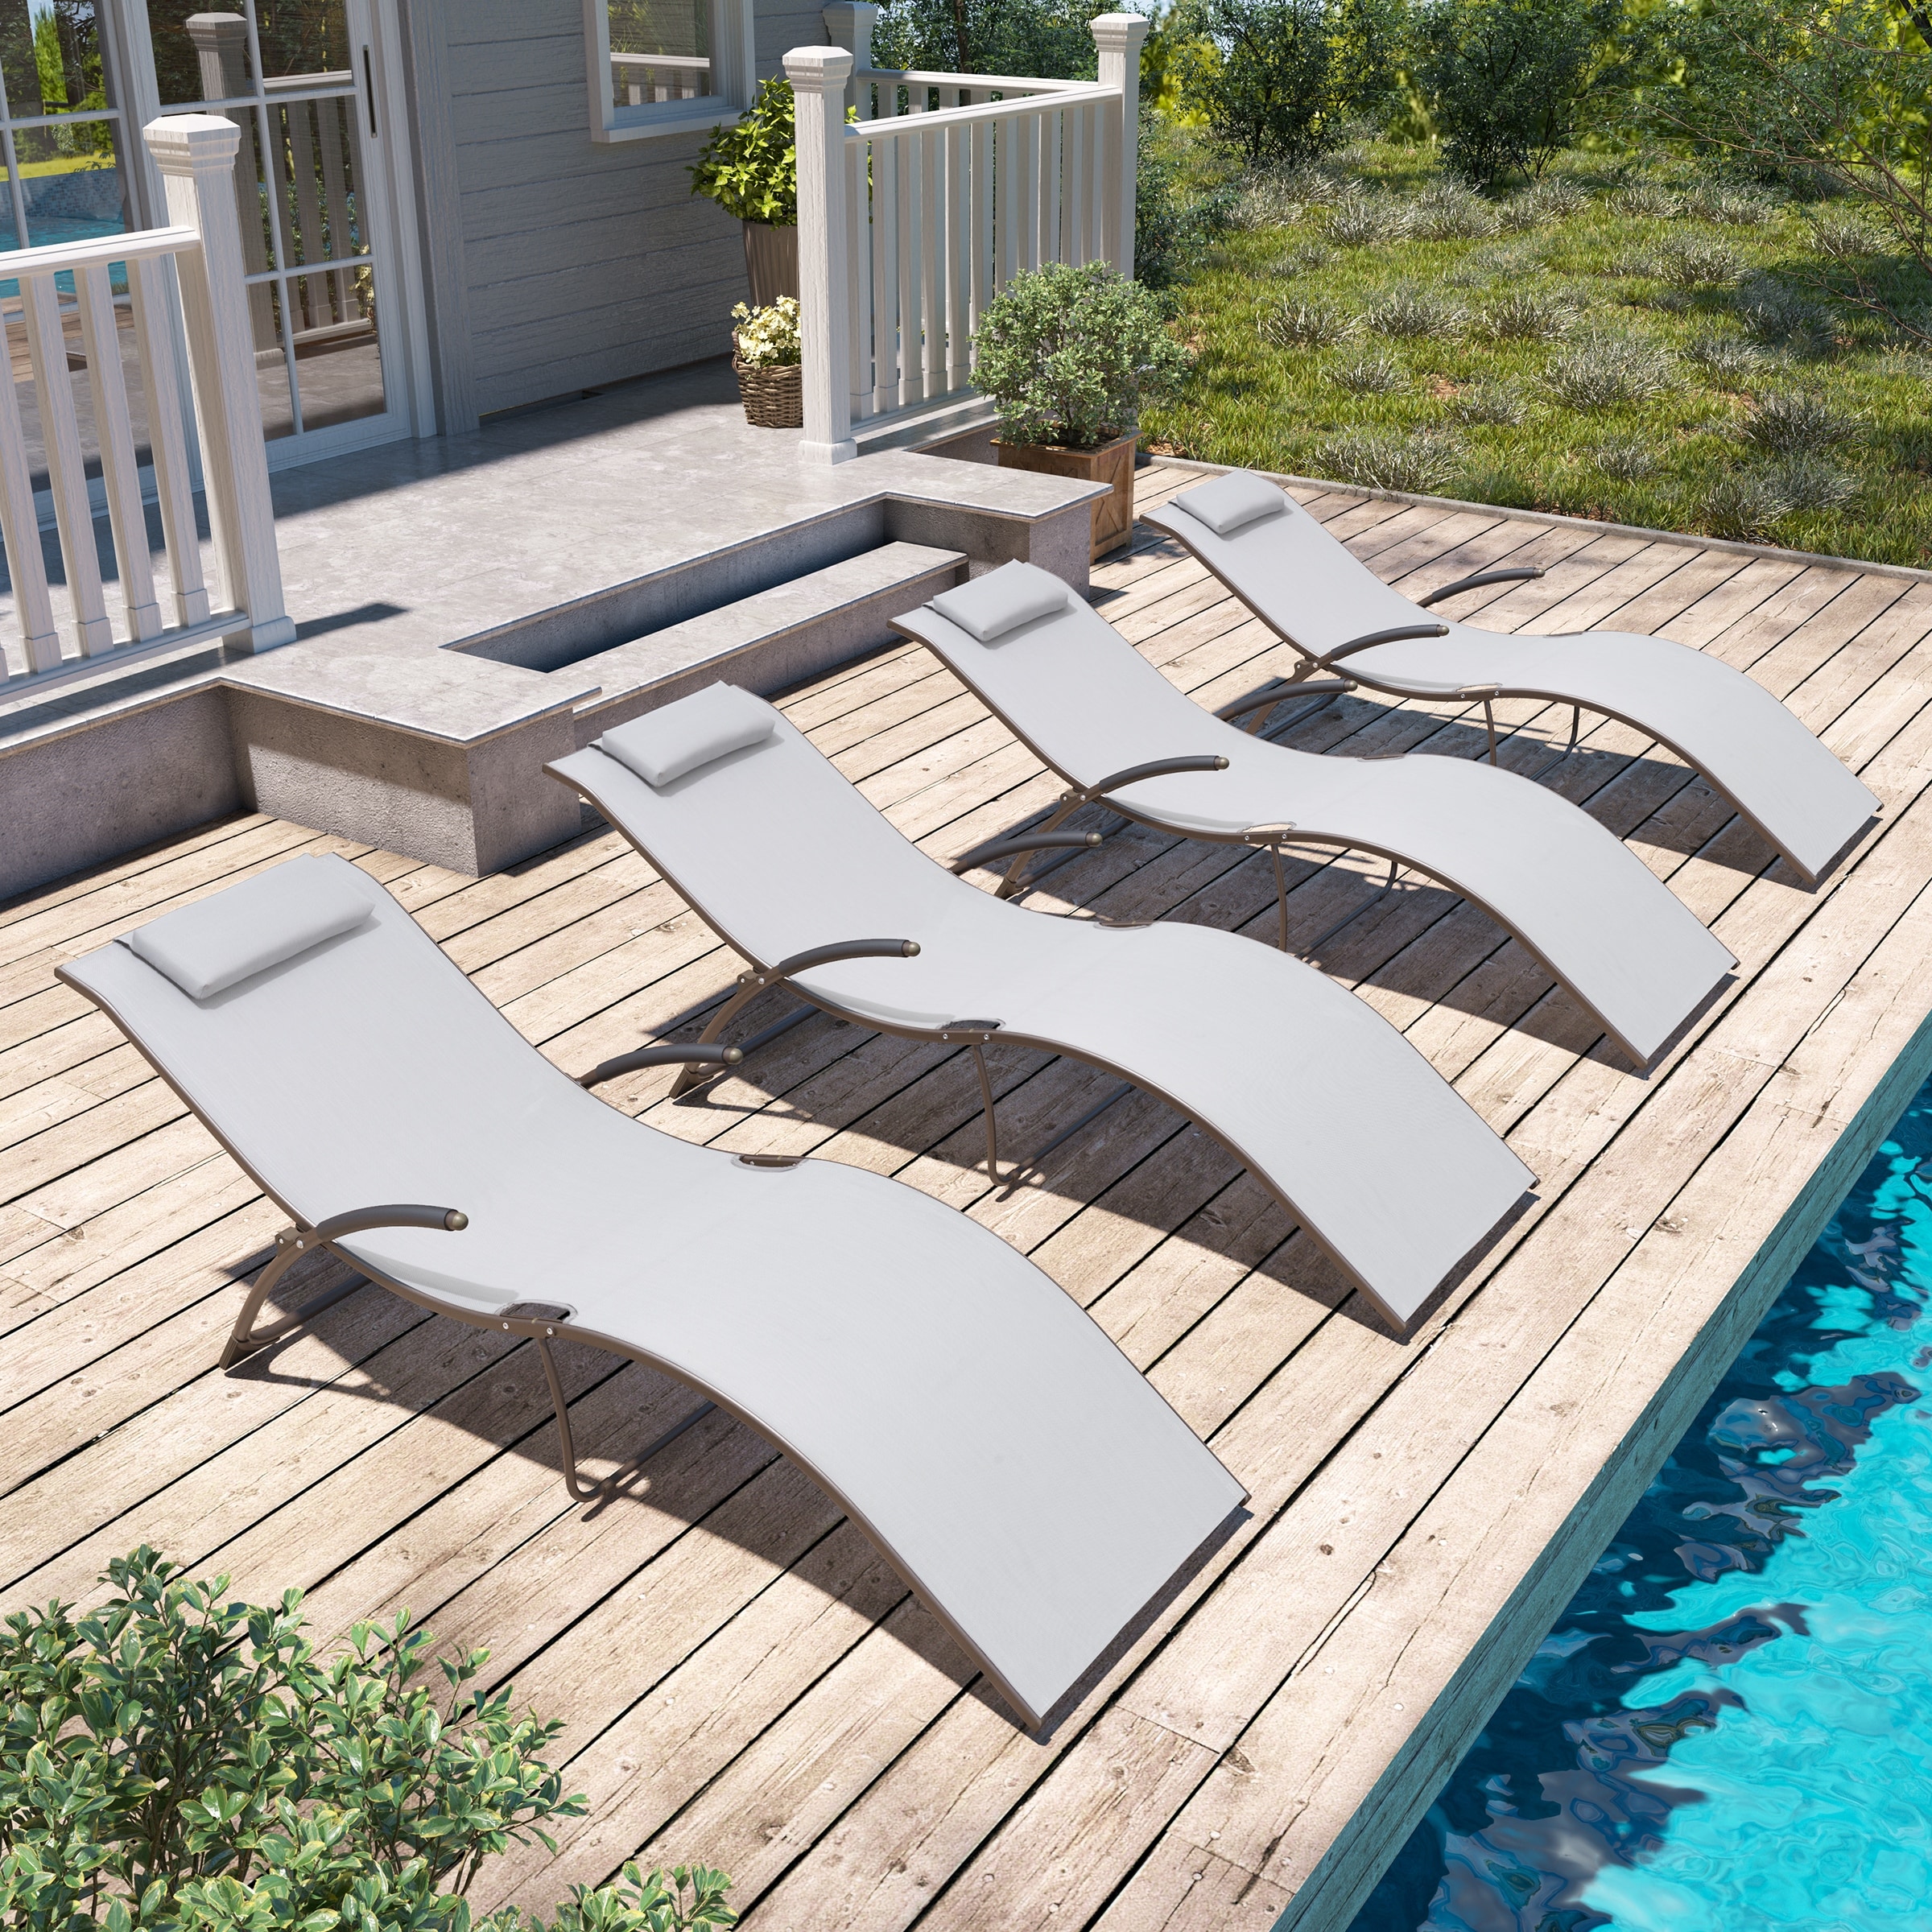 Outdoor Folding Chaise Lounge (set Of 4) By Pellebant - See The Details